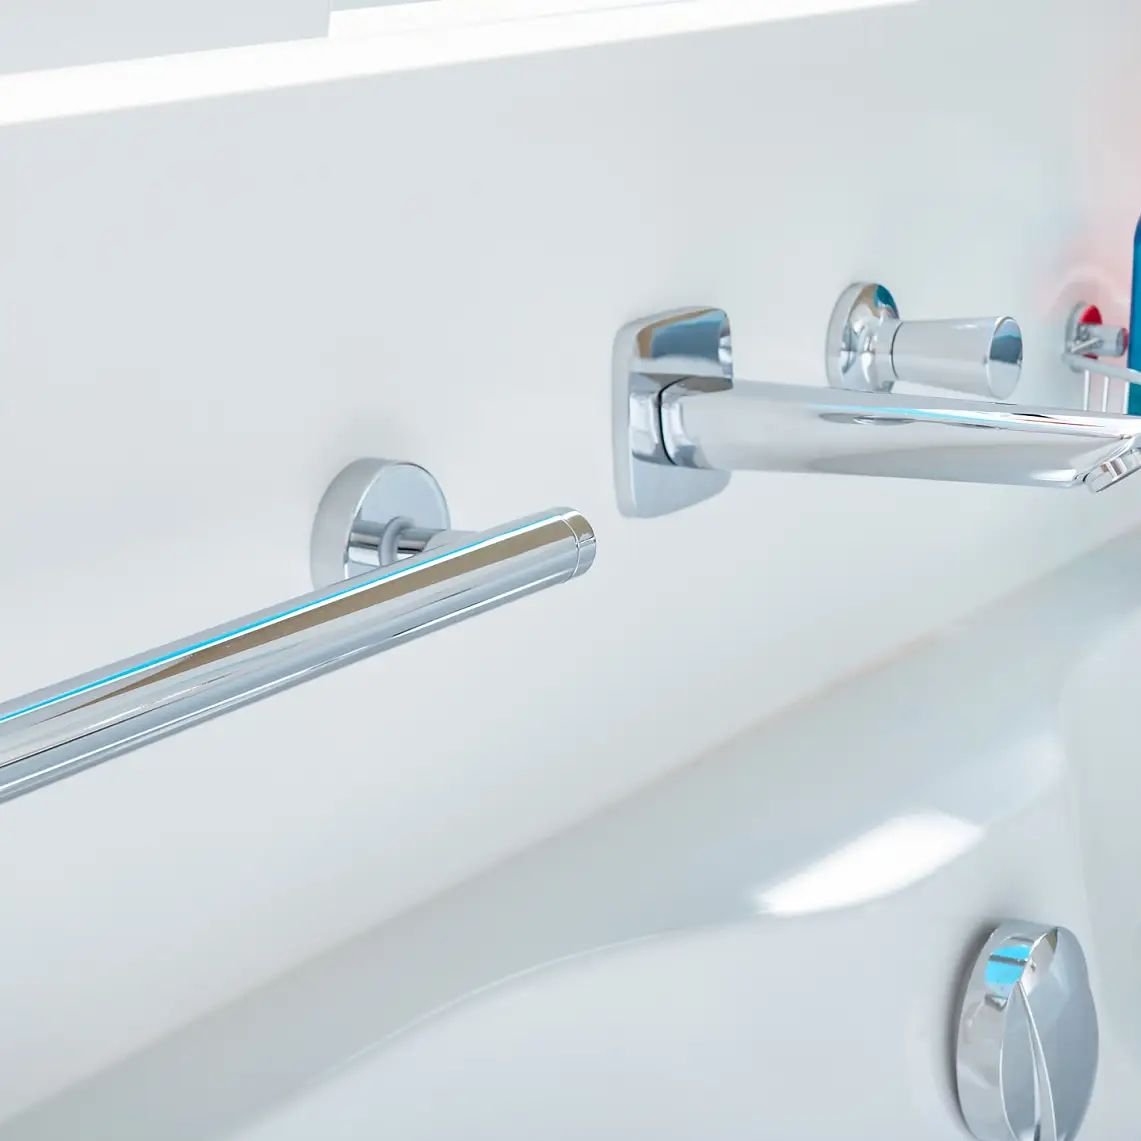 Bathrooms will forever be slippery. Stay safe with our bathtub handles for secure hold.